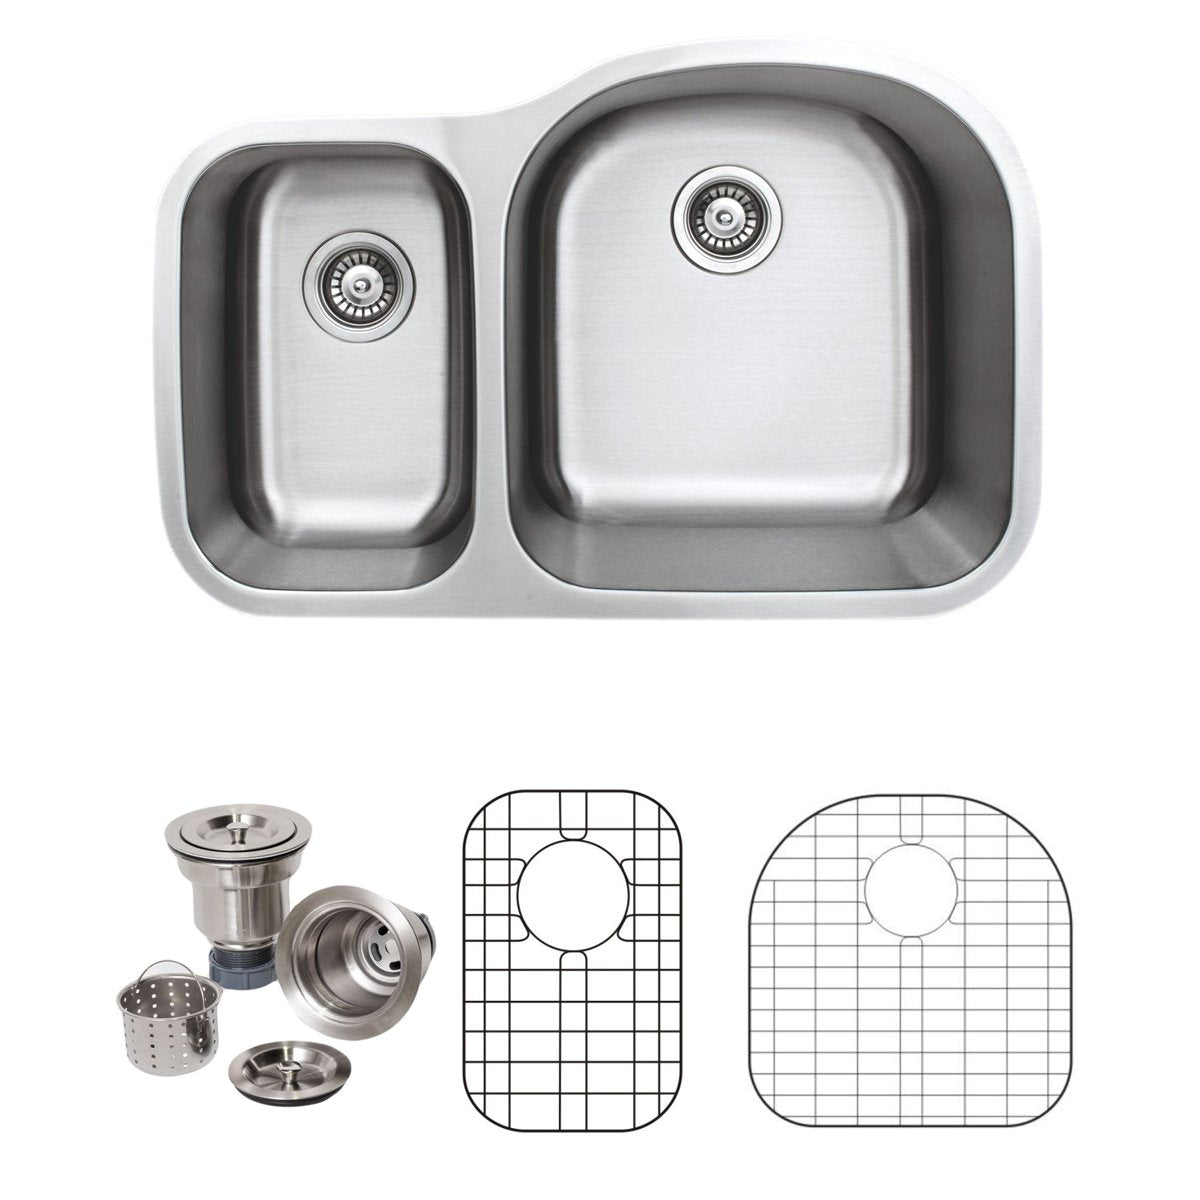 Wells Sinkware 32-Inch 16-Gauge Undermount Double Bowl Stainless Steel Kitchen Sink with Grid Rack and Basket Strainer-Kitchen Sinks Fast Shipping at Directsinks.